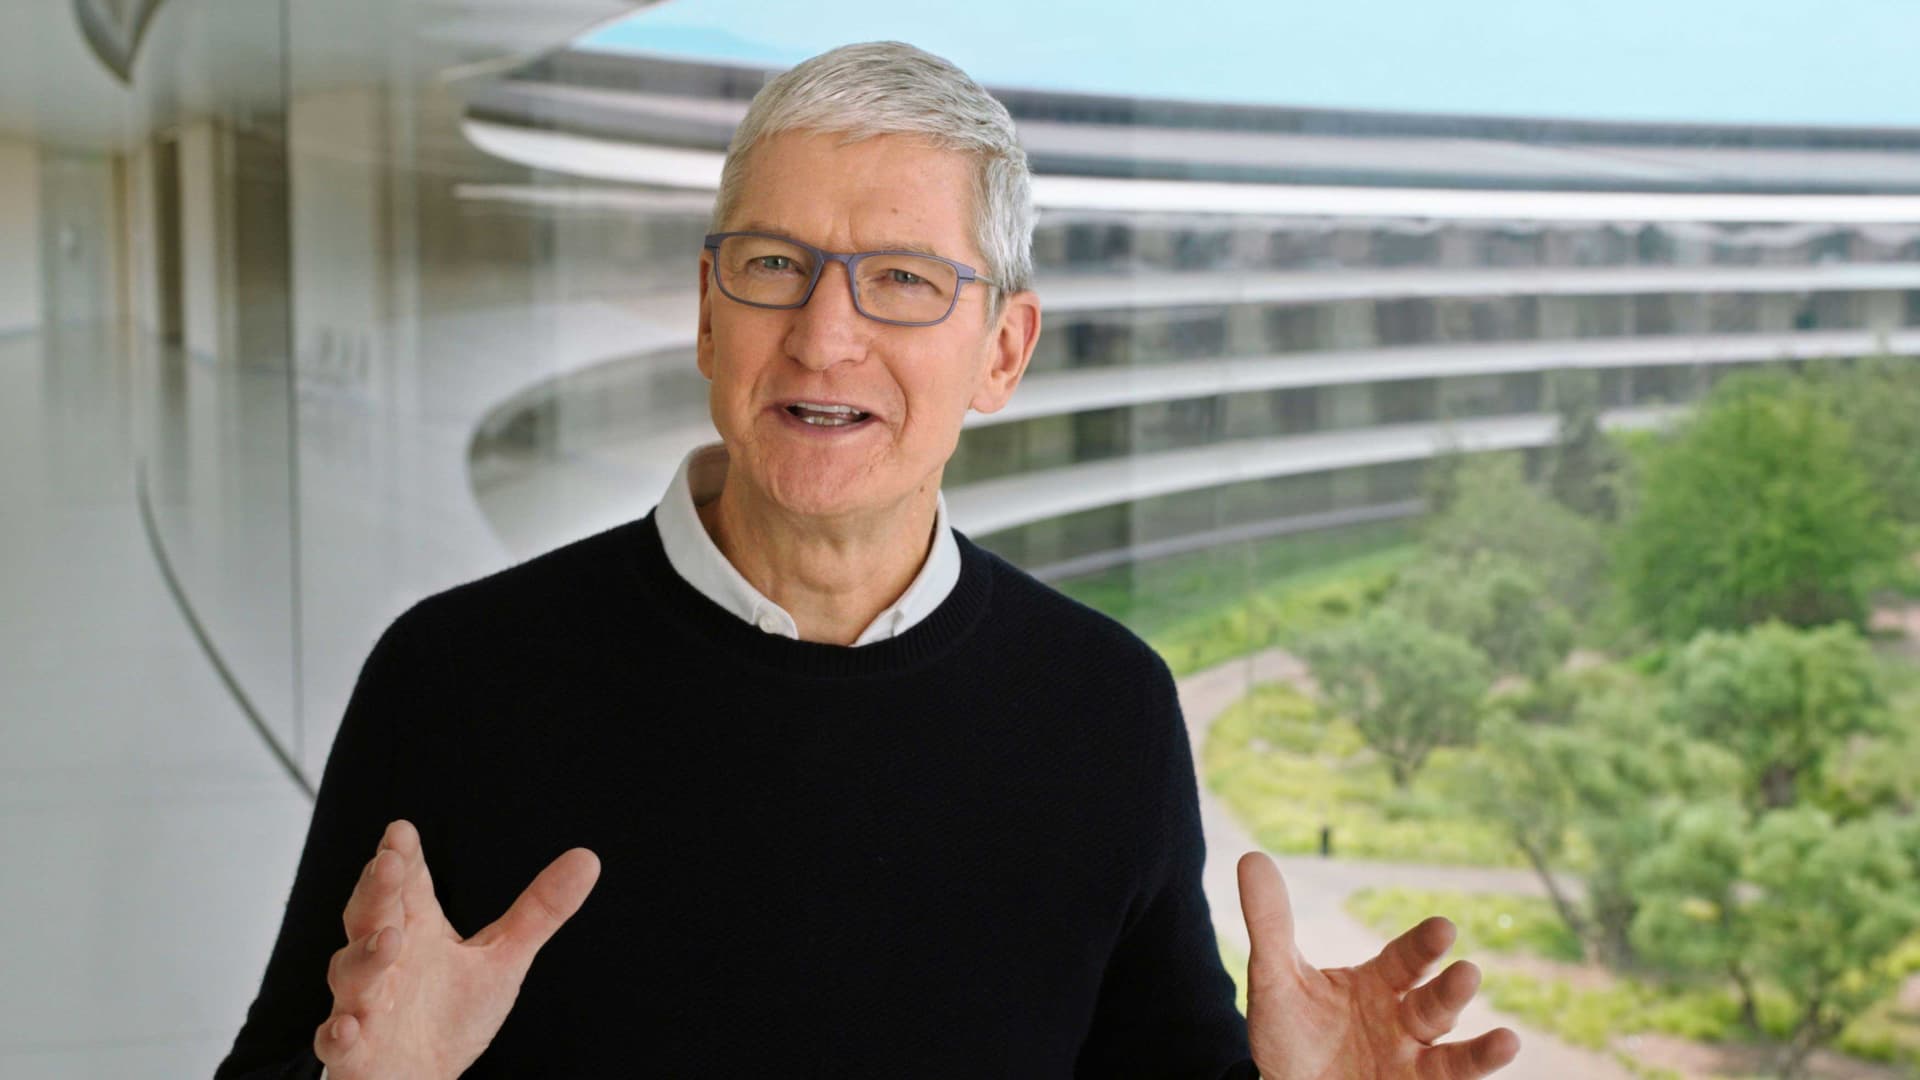 Apple now has $191.83 billion in cash on hand — down nearly 7% from a year ago